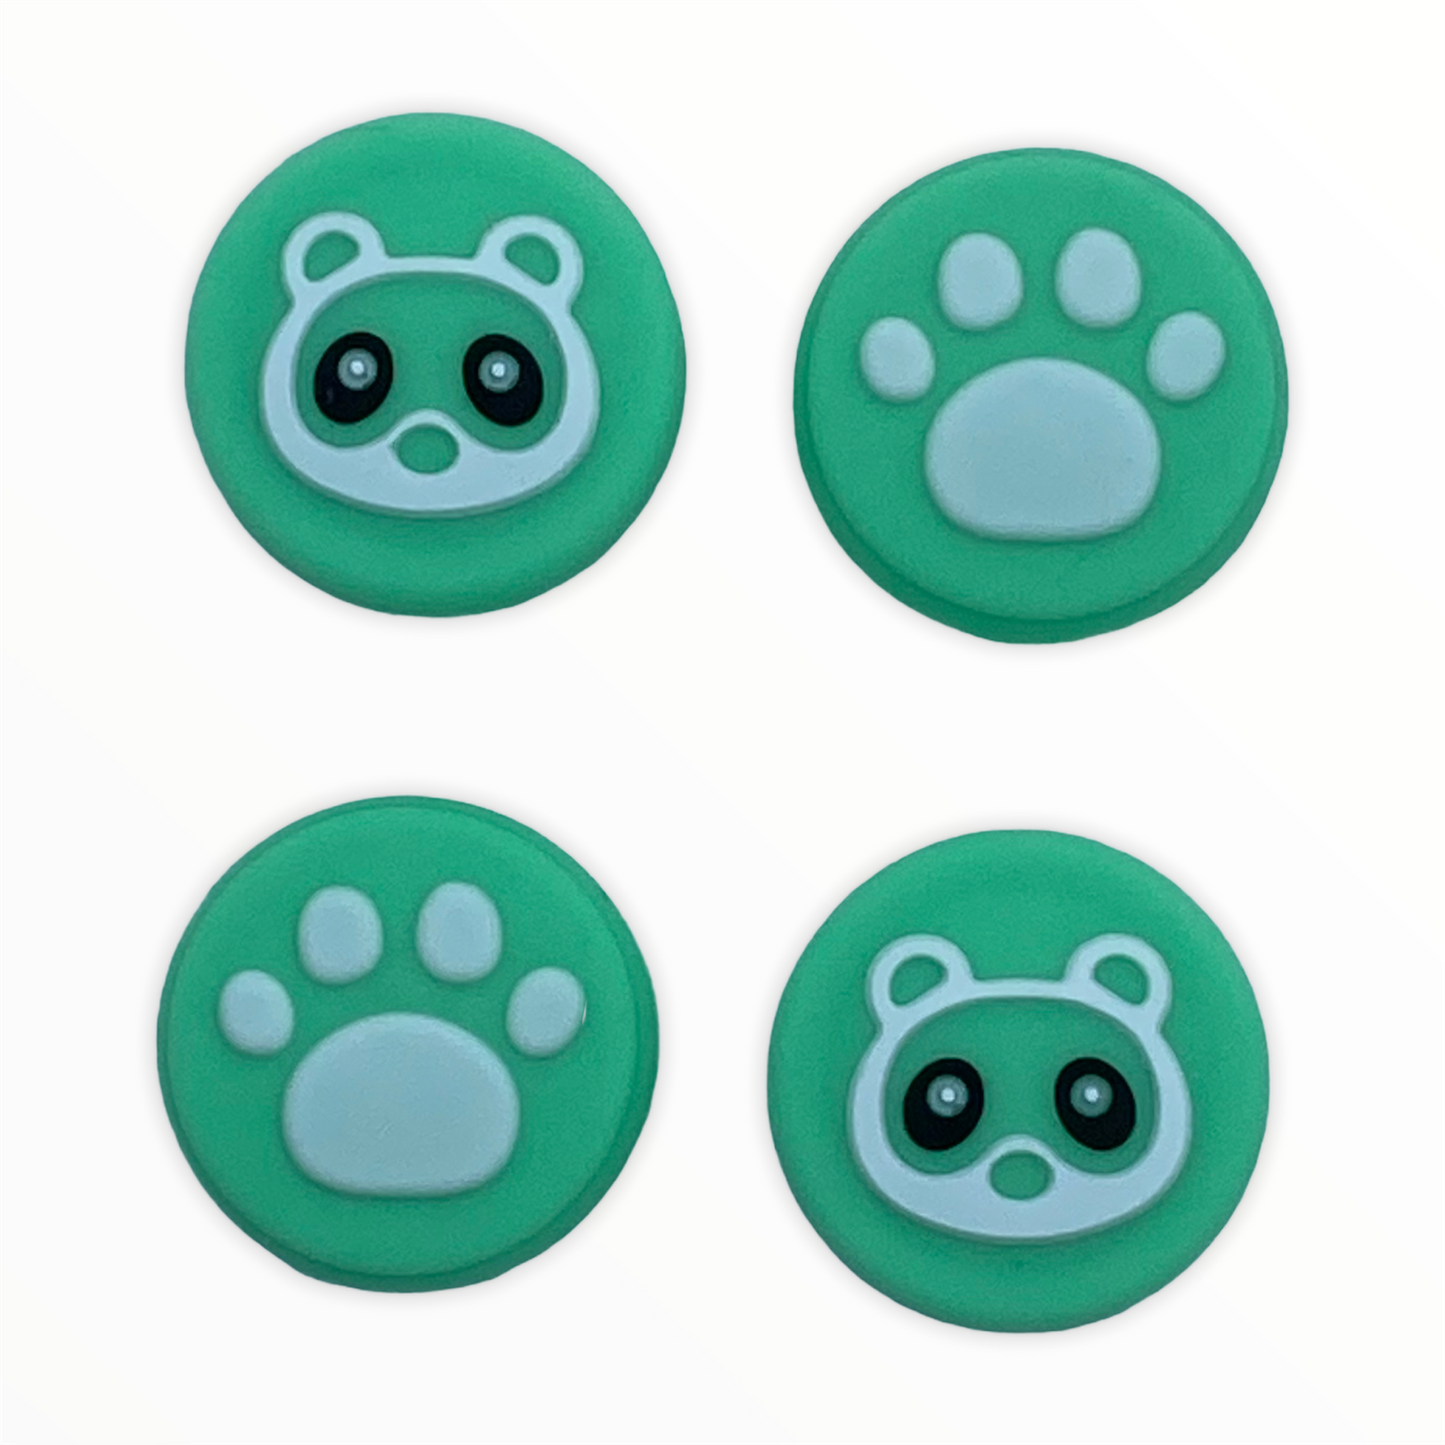 JenDore Green 4Pcs Raccoon Paws Silicone Thumb Grip Caps for Nintendo Switch